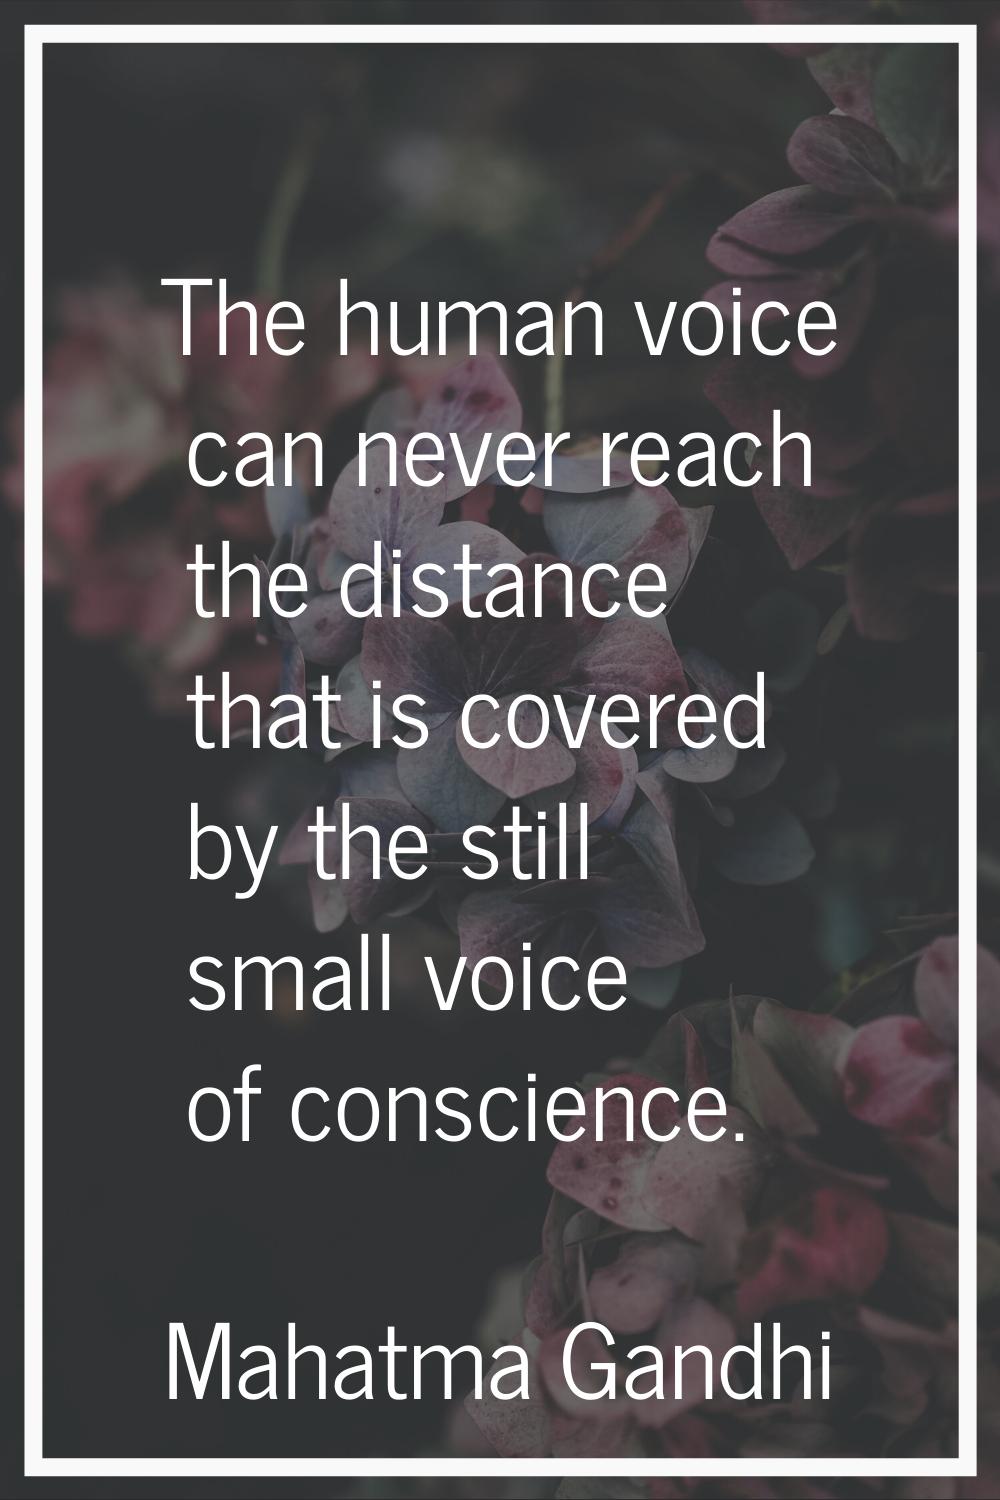 The human voice can never reach the distance that is covered by the still small voice of conscience